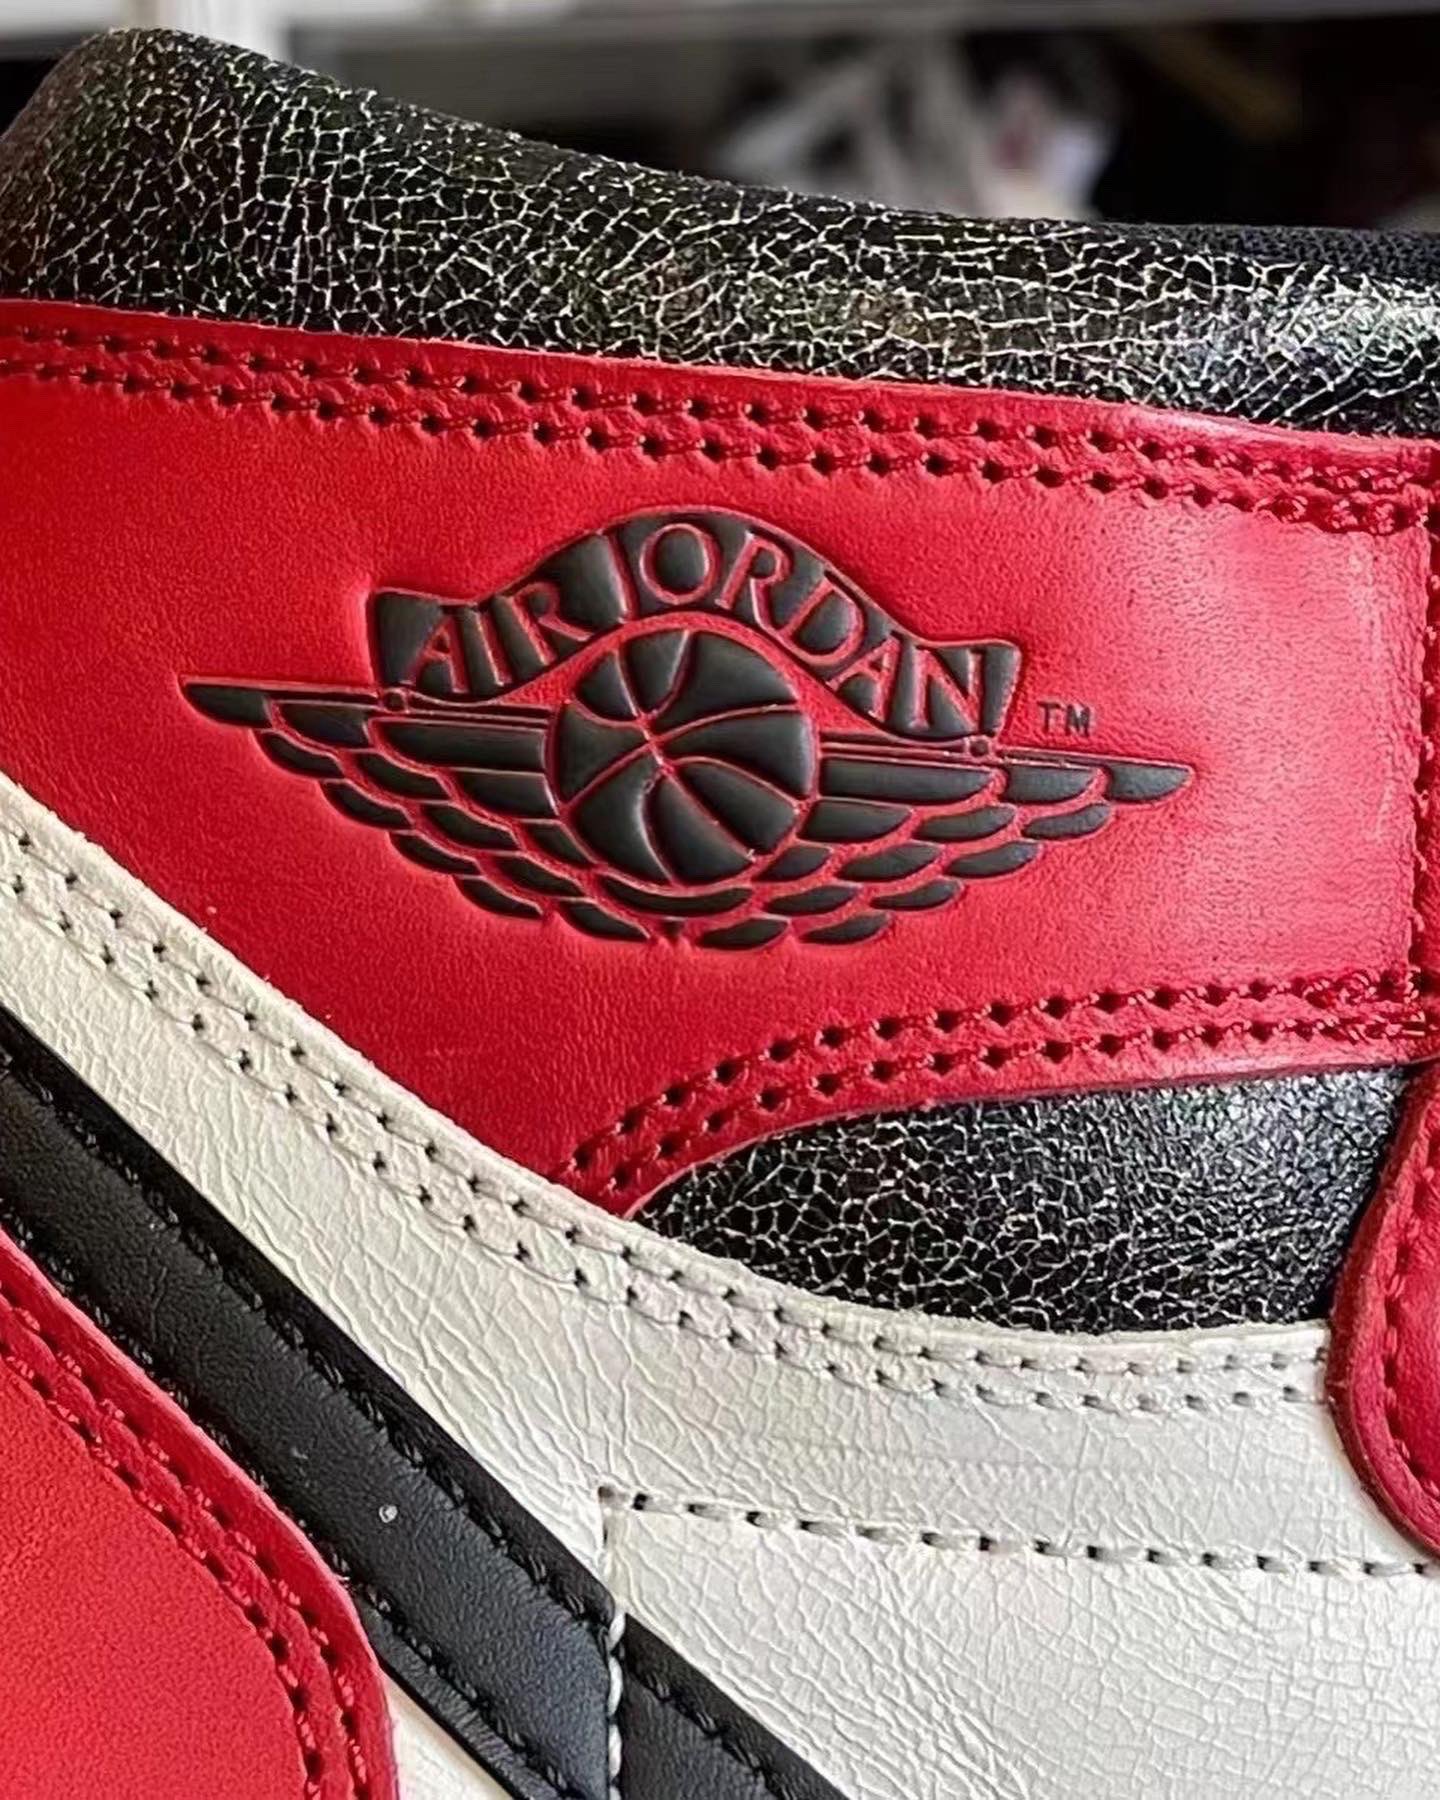 Aviator on X: "TMFP That's better. Air Jordan 1 High OG “Chicago  Reimagined” Color: Varsity Red/Black-Sail-Muslin Style Code: DZ5485-612  Release Date: October 29, 2022 Price: $180 https://t.co/cOQpS8WyIE" / X